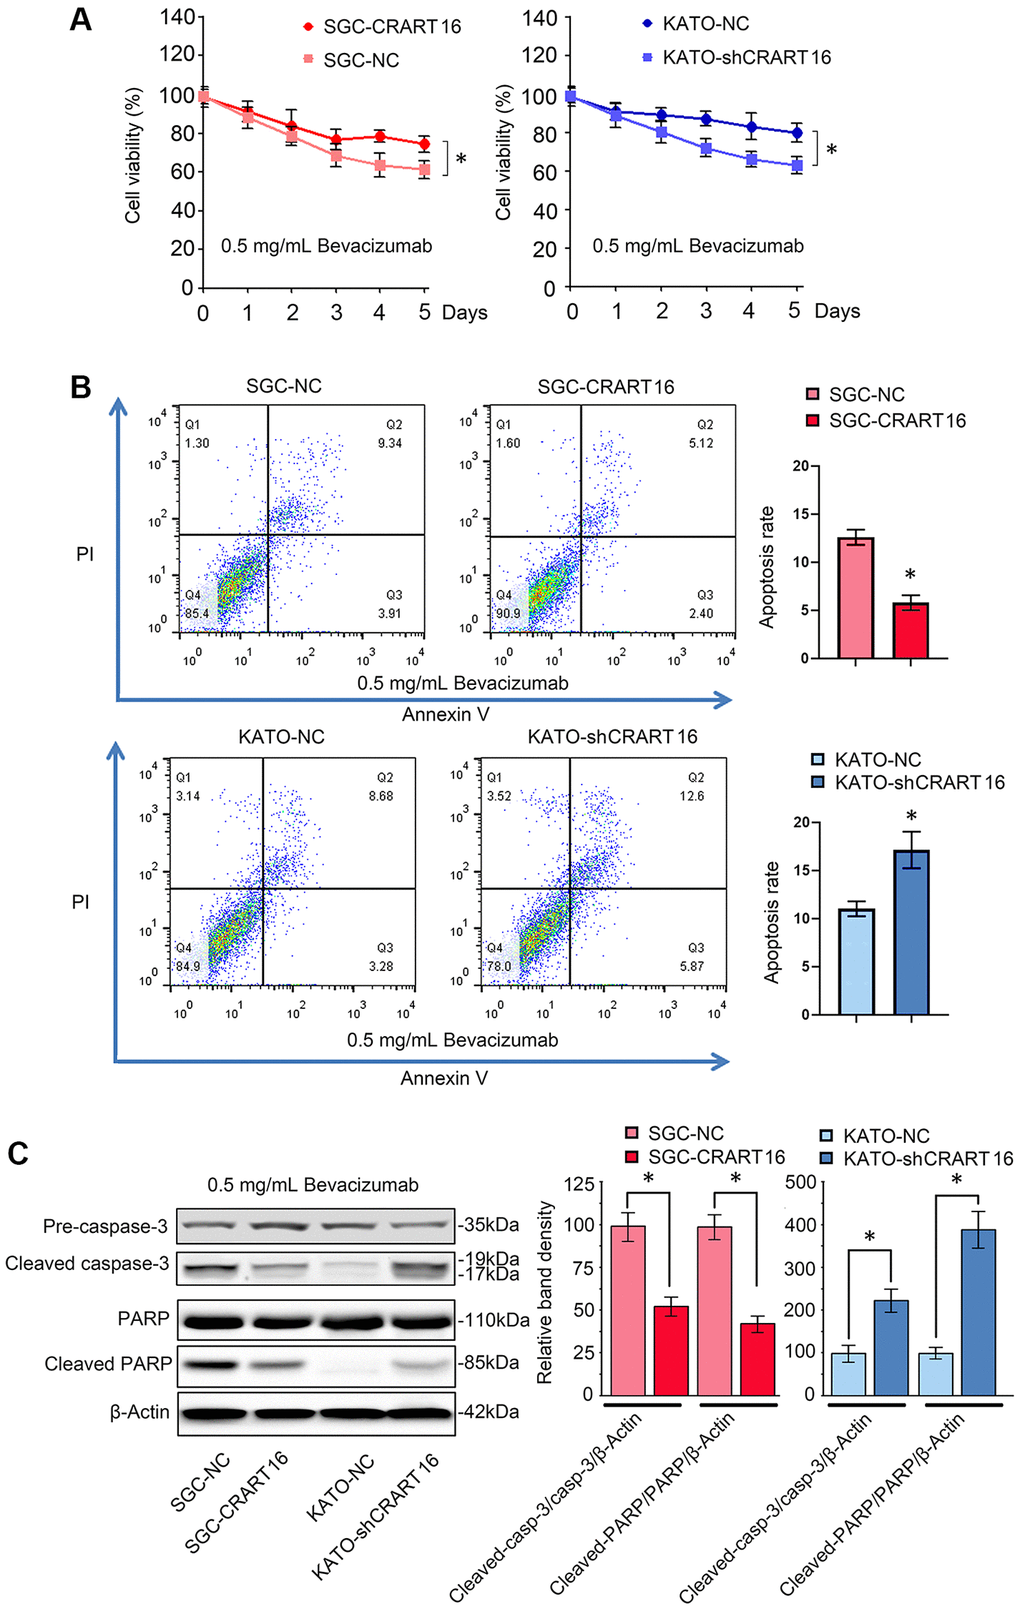 CRART16 overexpression reverses bevacizumab-induced apoptosis. (A) The CCK8 assay was carried out to evaluate the viability of different gastric cancer cells treated with bevacizumab for five days (*P B) Flow cytometry showing the apoptosis rate of indicated gastric cancer cells treated with bevacizumab for 48 hours (*P C) Based on western blotting, the relative expression levels of cleaved caspase-3 and cleaved PARP in indicated gastric cancer cells treated with bevacizumab for 48 hours. β-Actin was used as a loading control (*P 